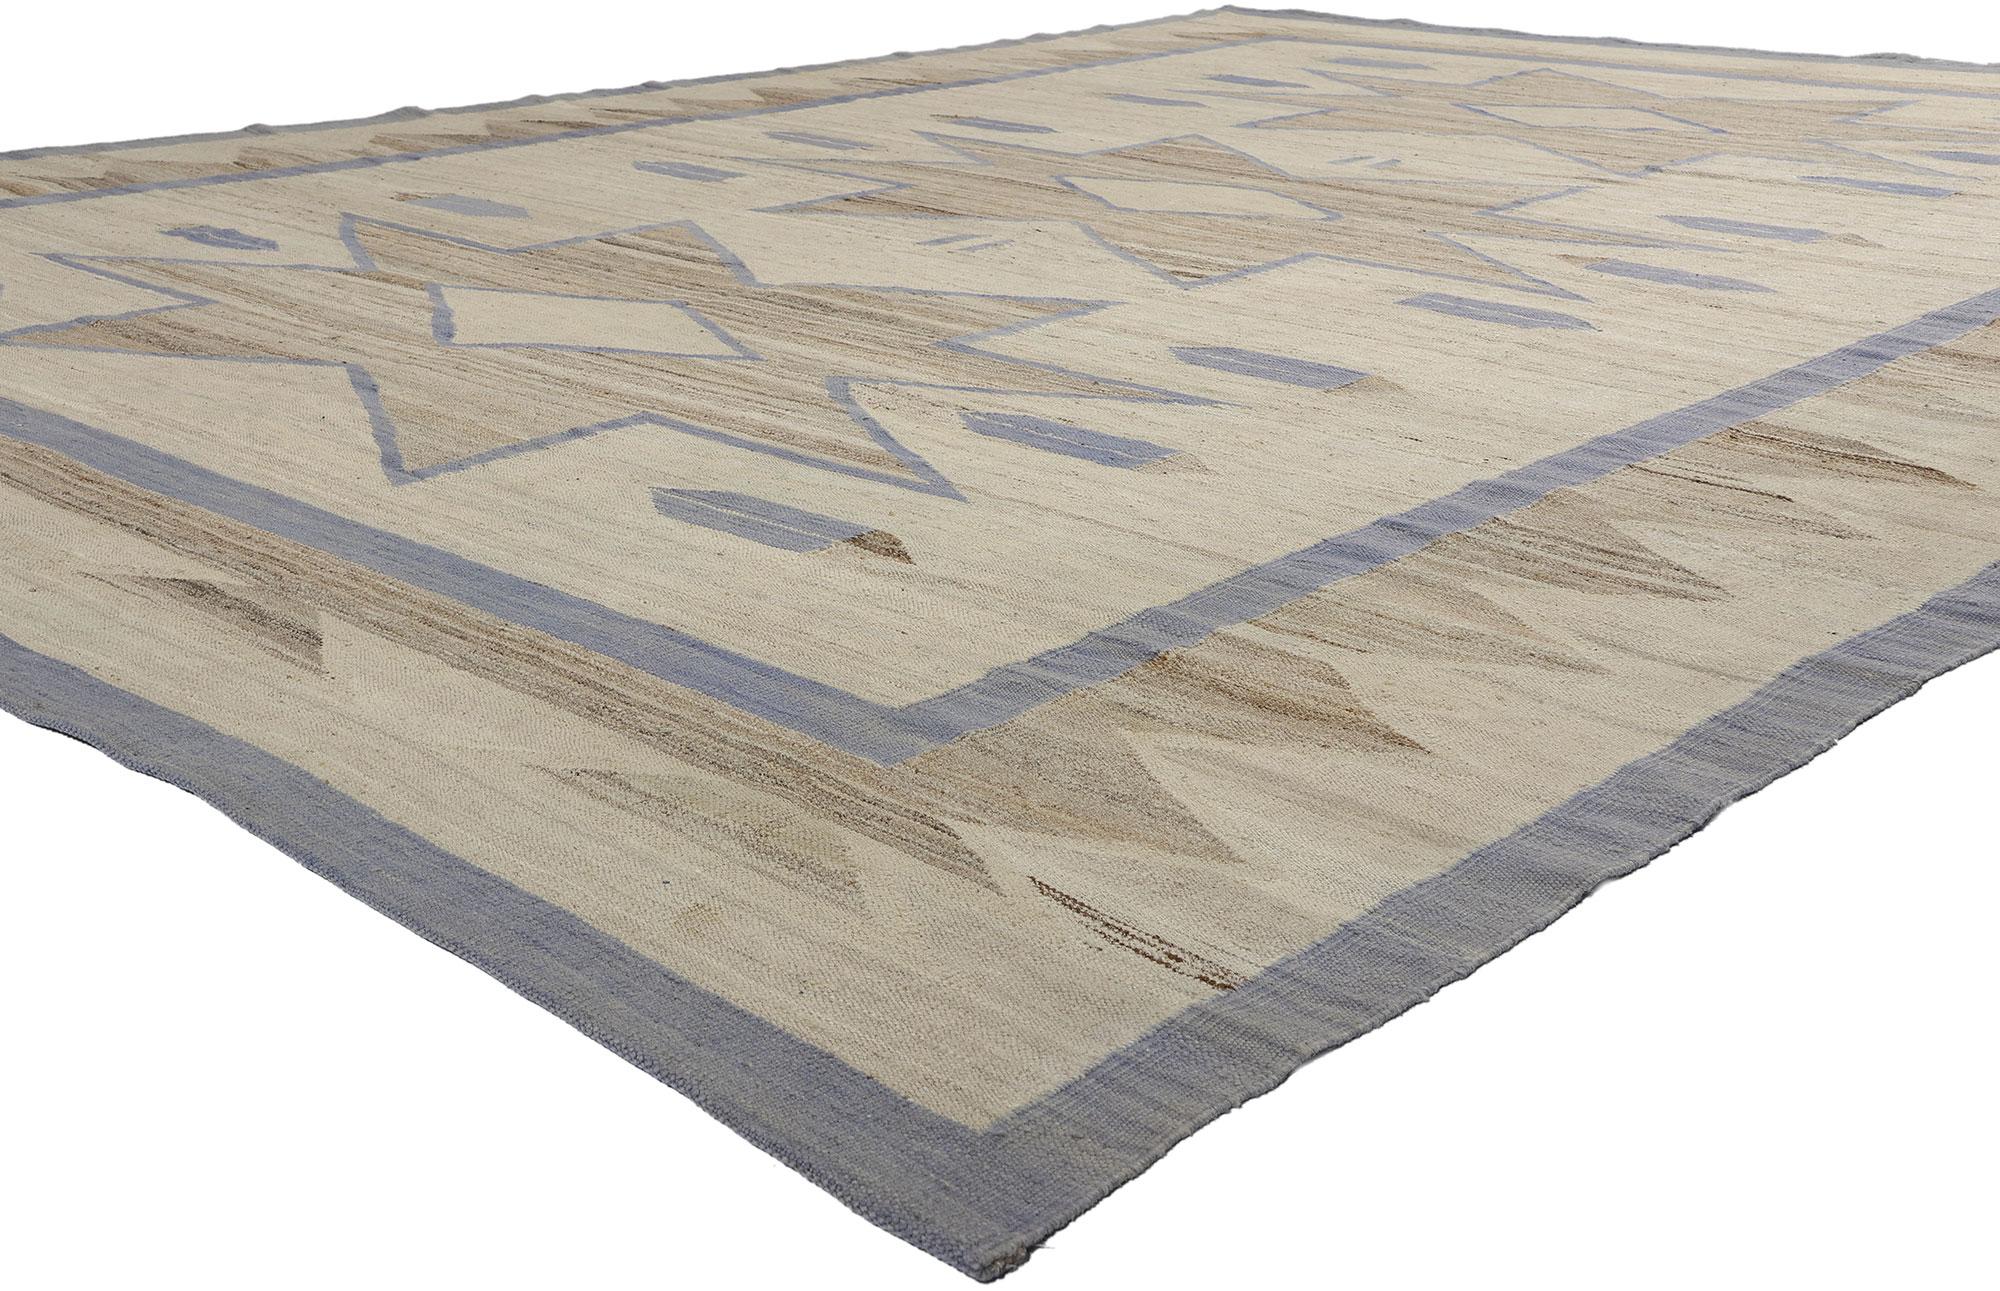 81093 Southwest Modern Desert Navajo-Style Rug, 09'10 x 13'03. Step into the captivating domain of this handwoven wool Southwest Modern Desert Chic Navajo-style rug, where each thread whispers tales of tradition and modernity woven together